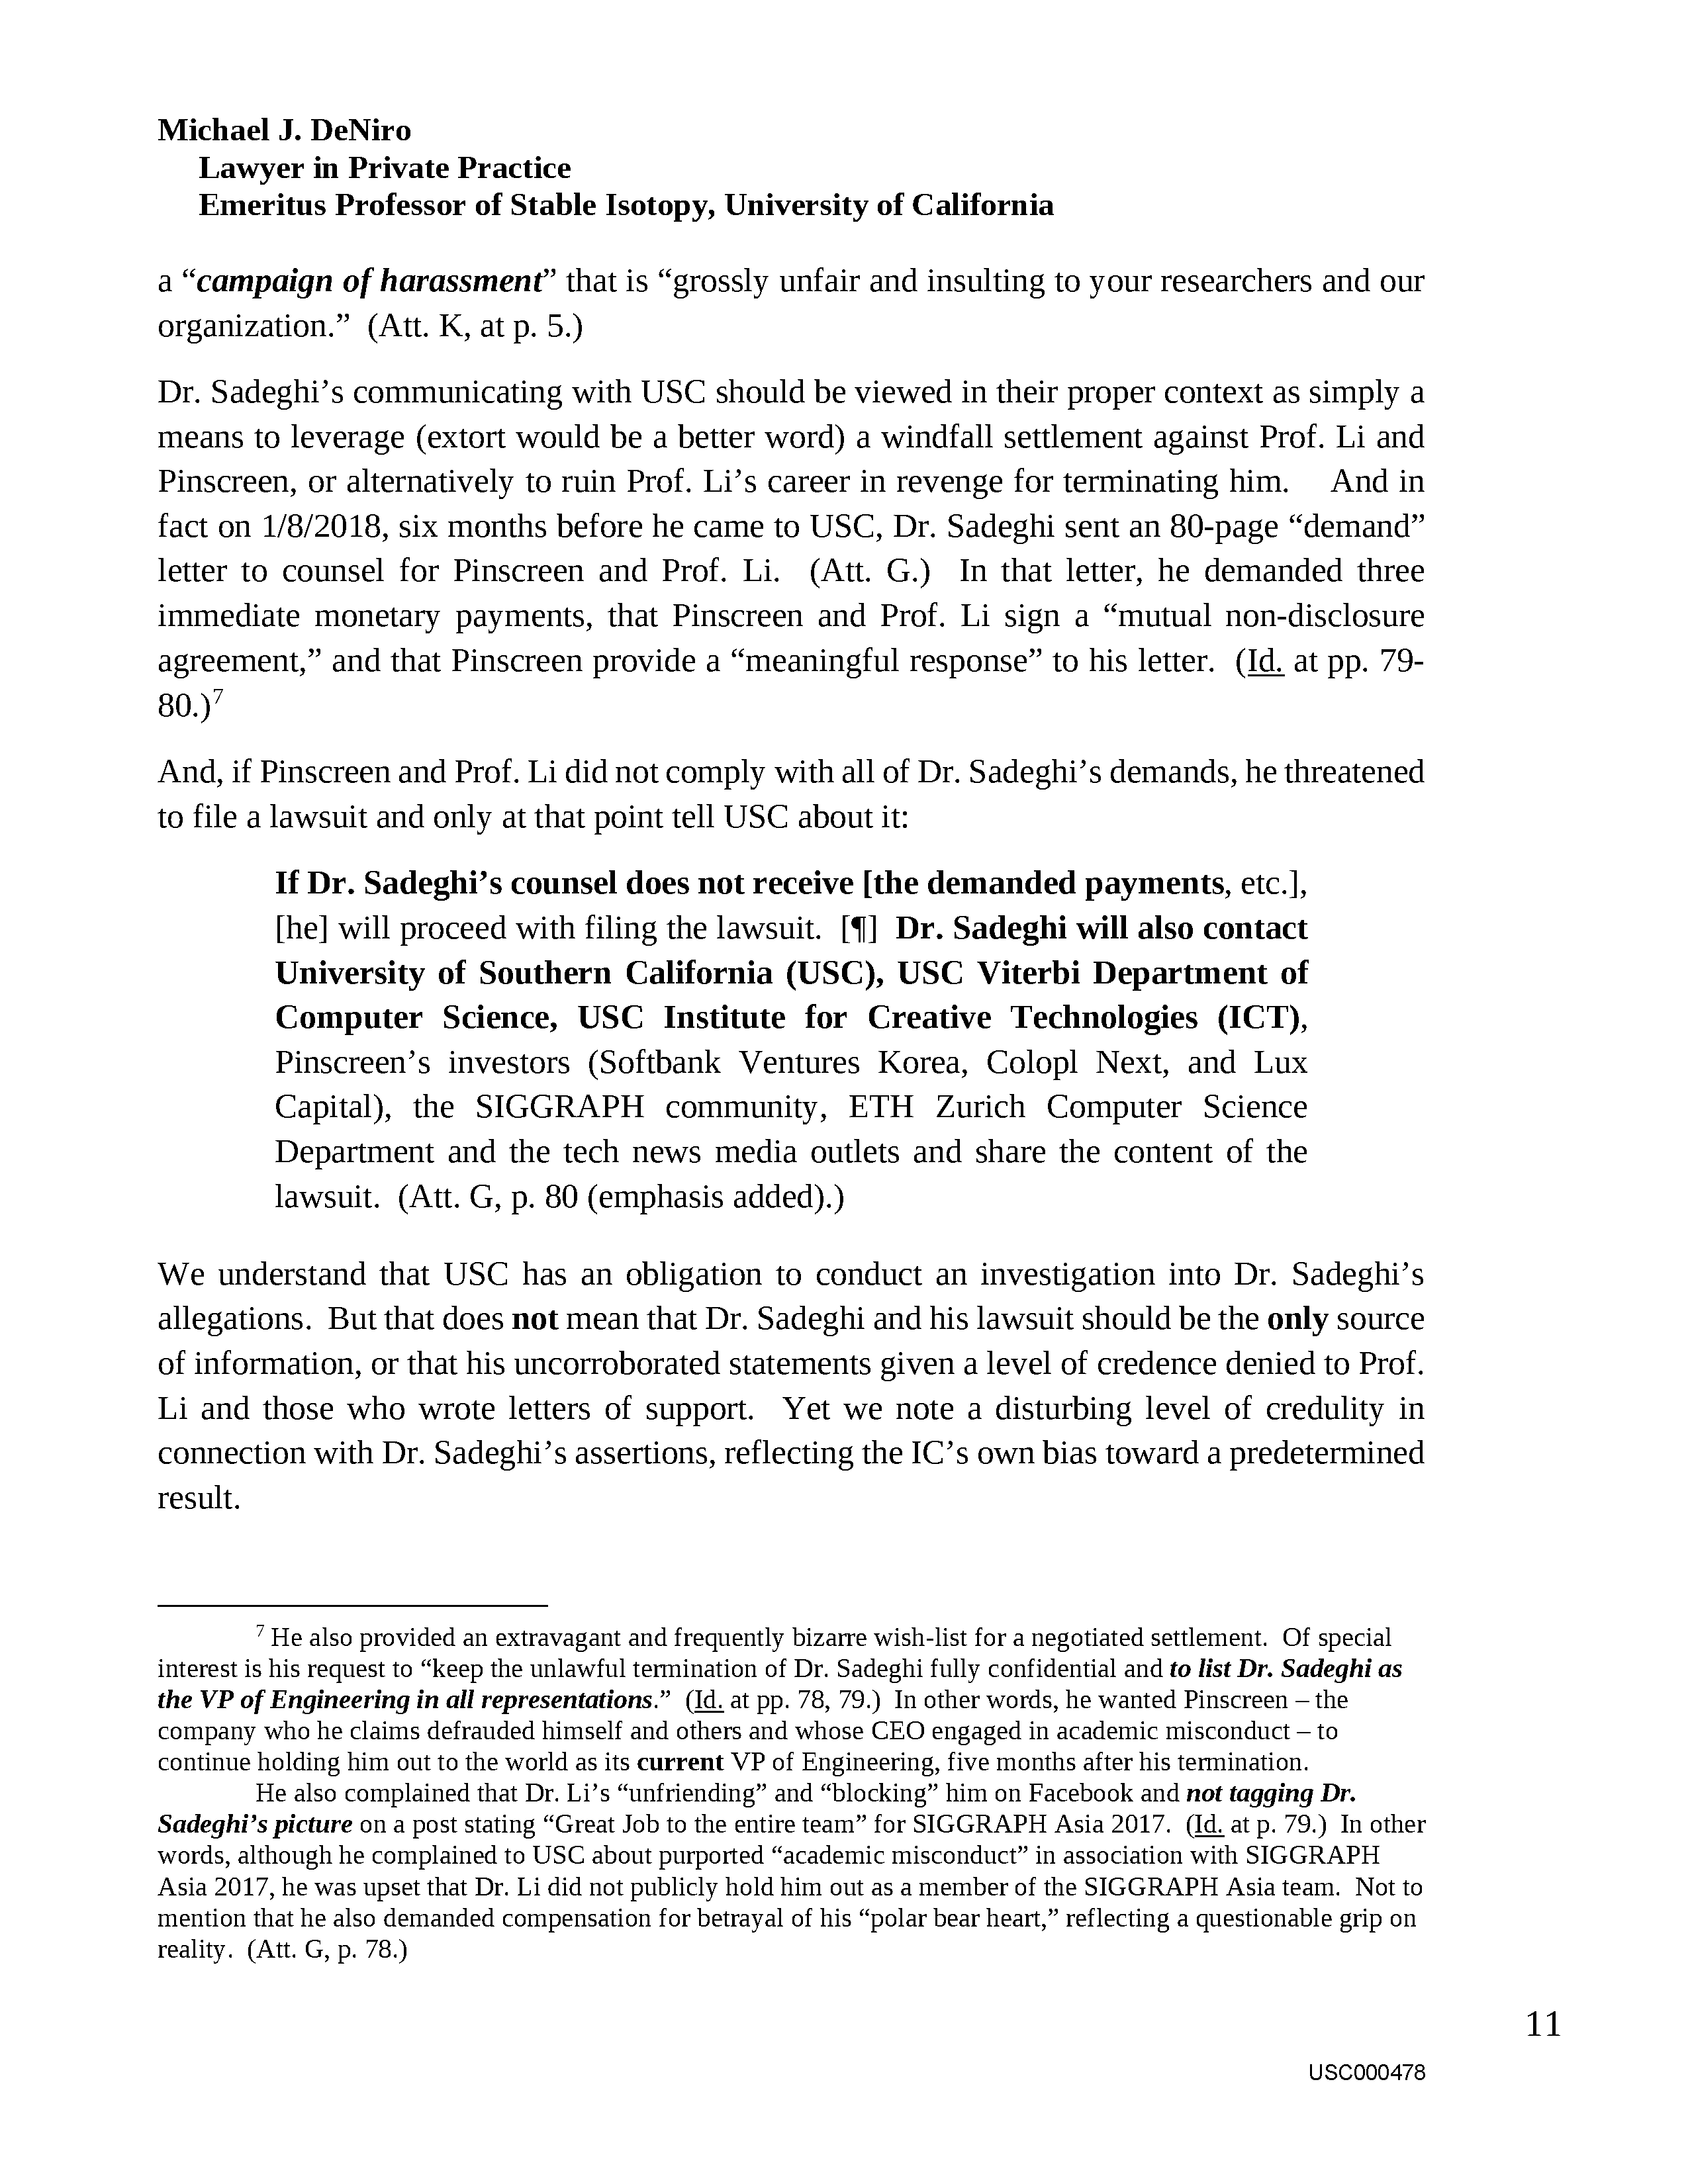 USC's Investigation Report re Hao Li's and Pinscreen's Scientific Misconduct at ACM SIGGRAPH RTL 2017 Page 480